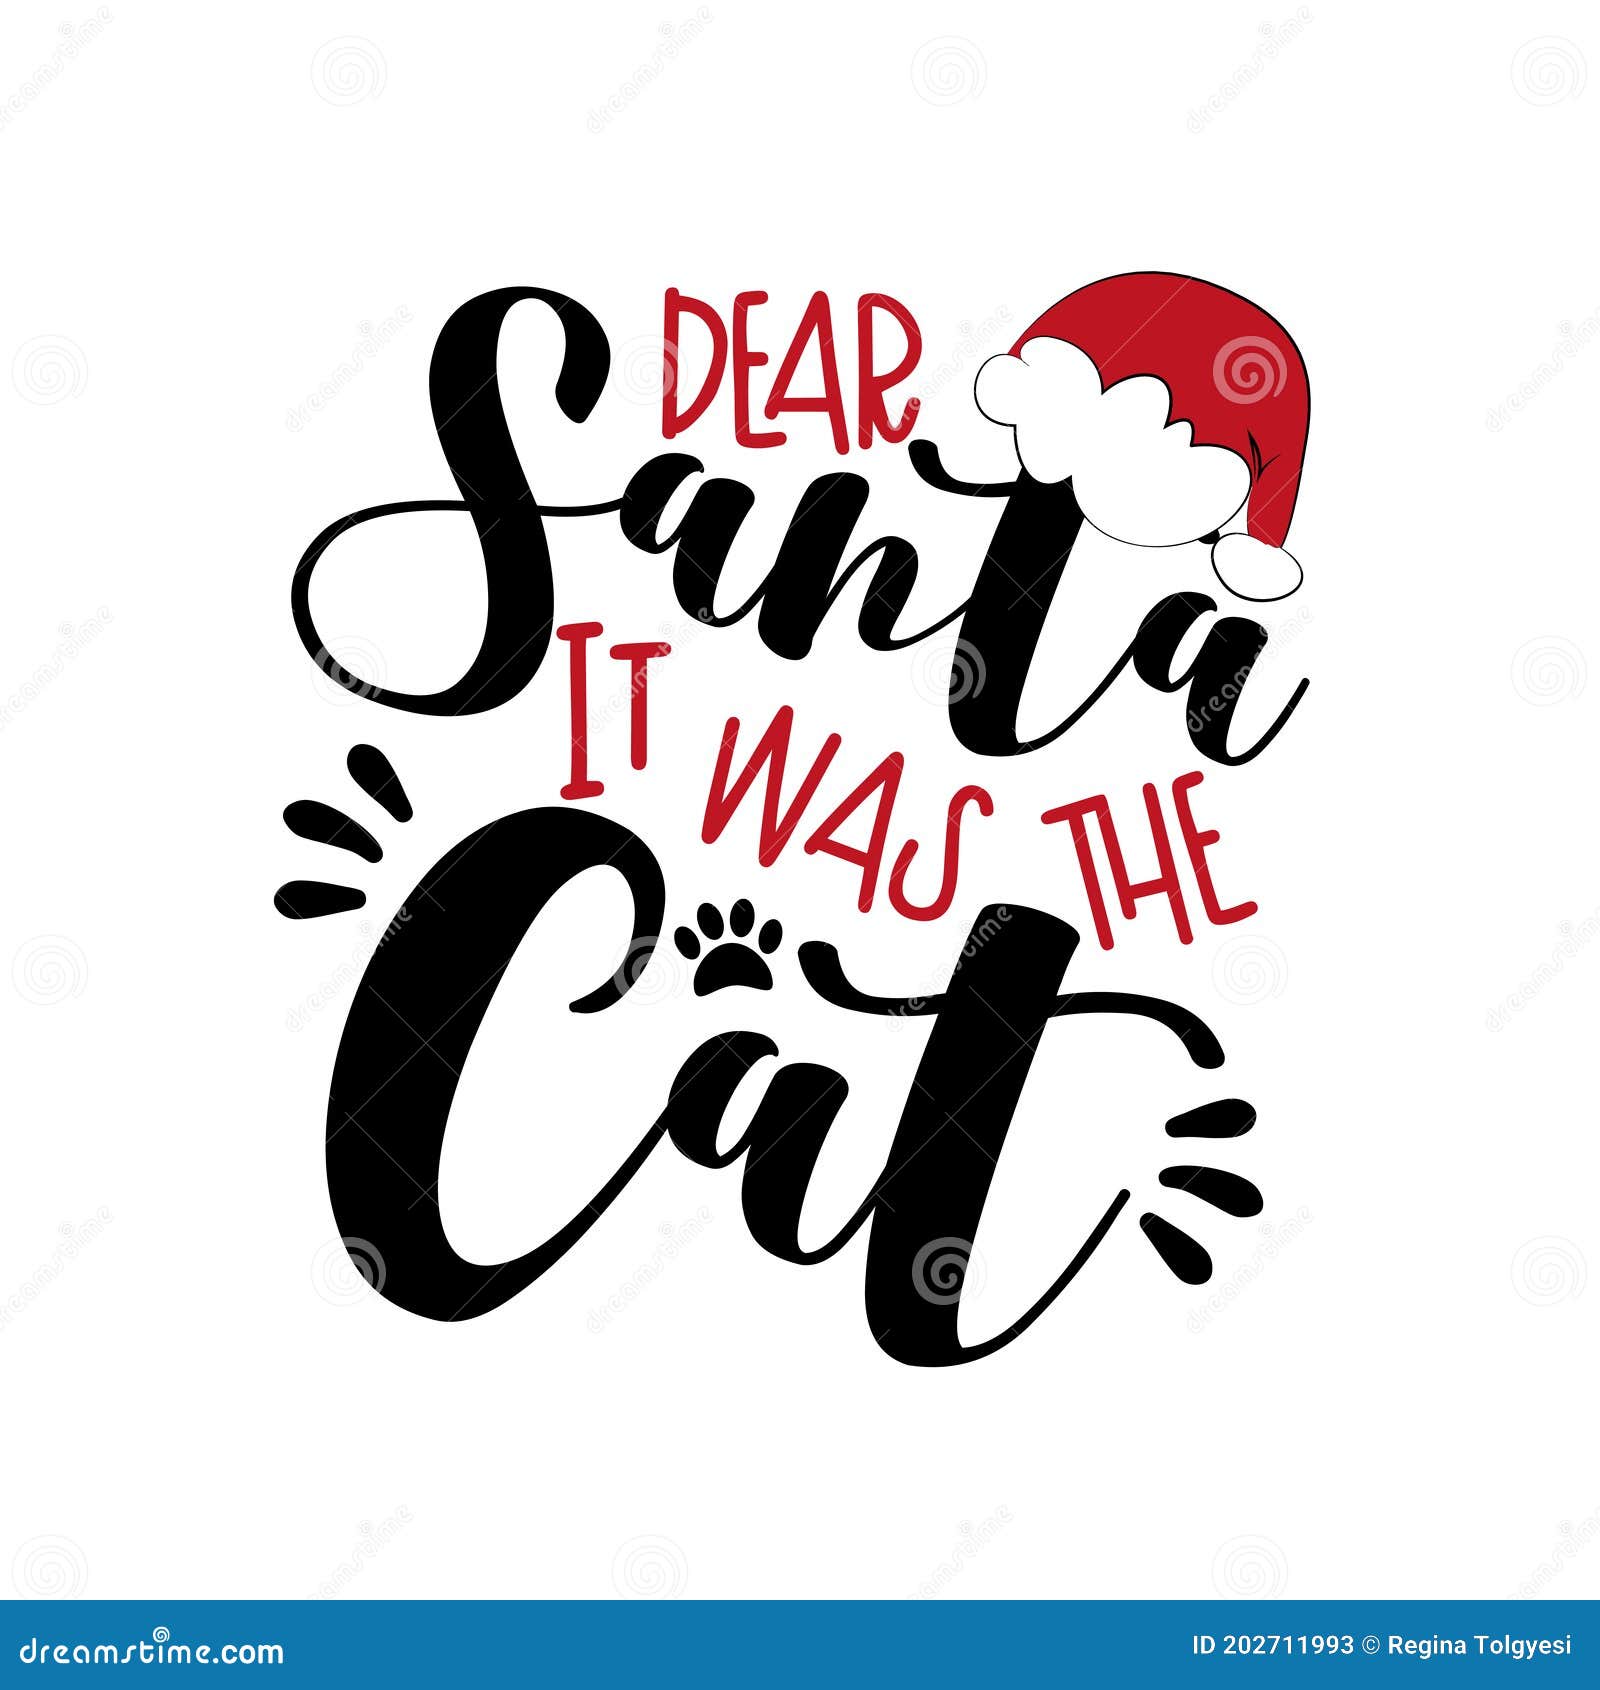 dear santa it was the cat - funny phrase for christmas.